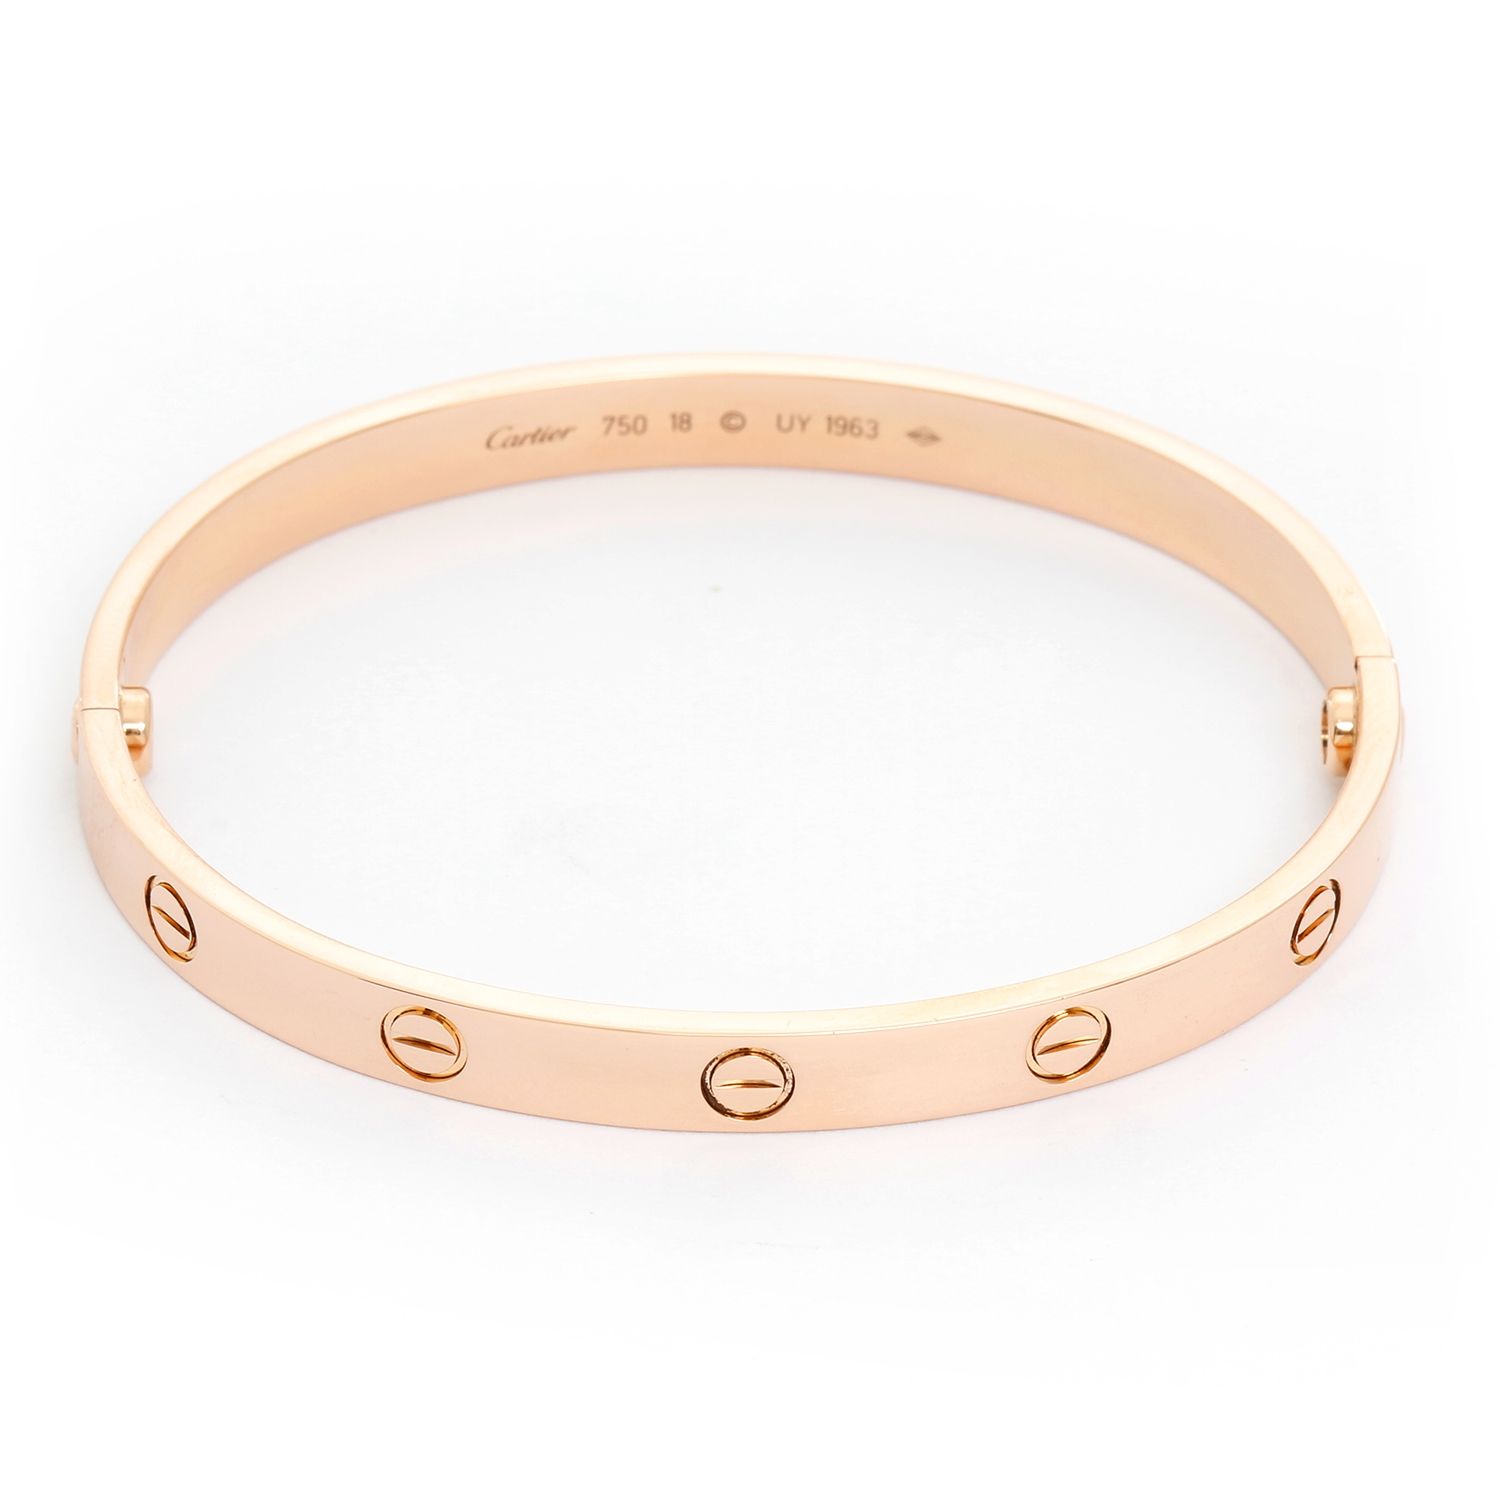 Aggregate more than 81 cartier love bracelet screw replacement - in ...